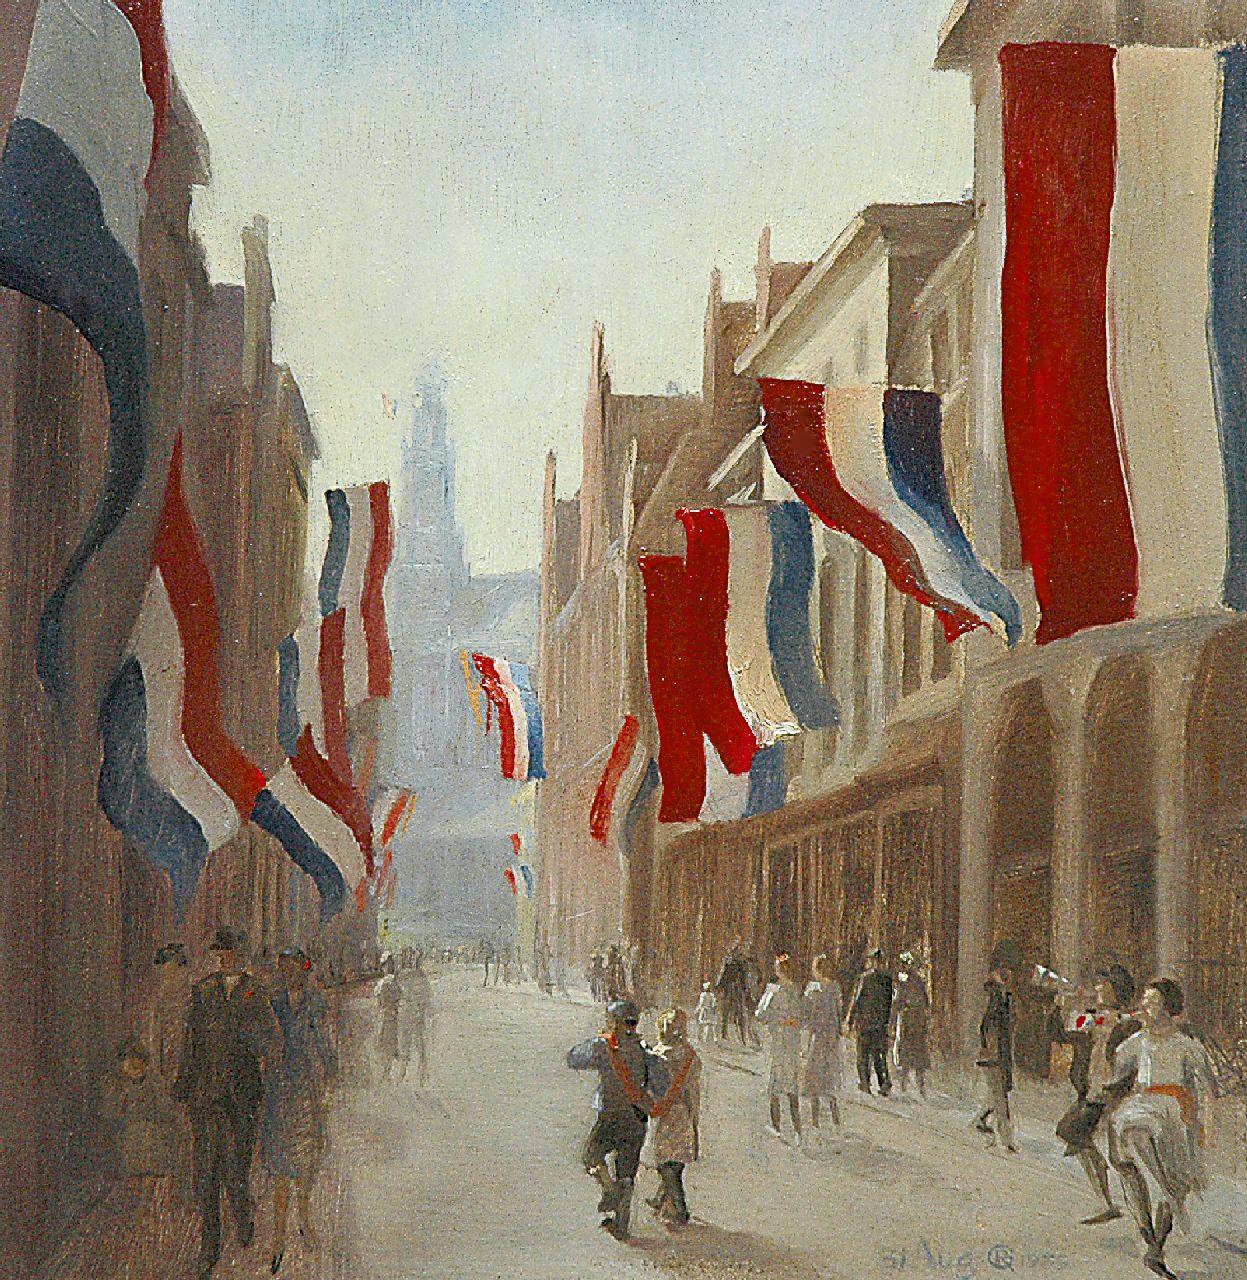 Gerbrands R.  | Roelf Gerbrands, Celebrations in Haarlem for the birth of Princess Irene, Öl auf Holz 22,4 x 22,0 cm, signed l.r. with monogram und dated 31 Aug. 1939